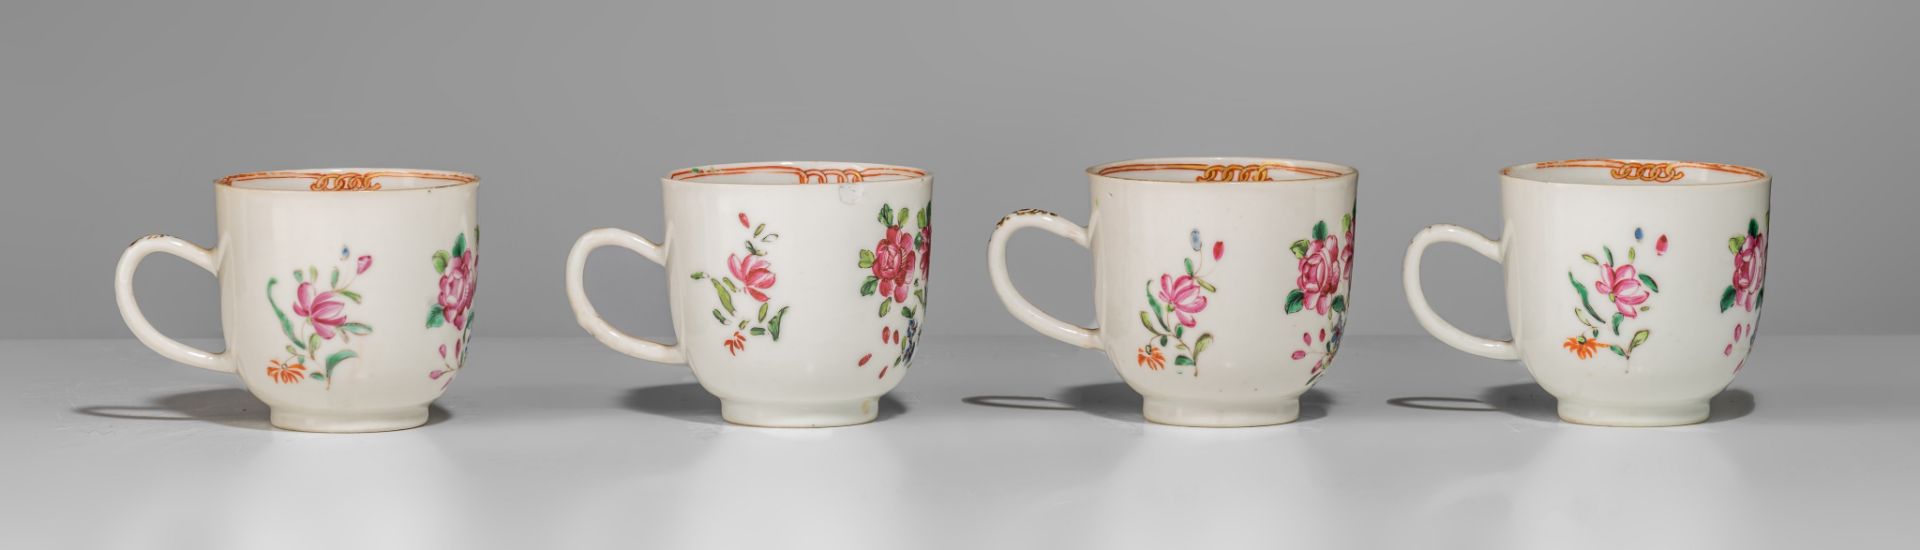 A collection of famille rose and gilt decorated export porcelain ware, 18thC, largest - H 12,5 - 34, - Image 15 of 20